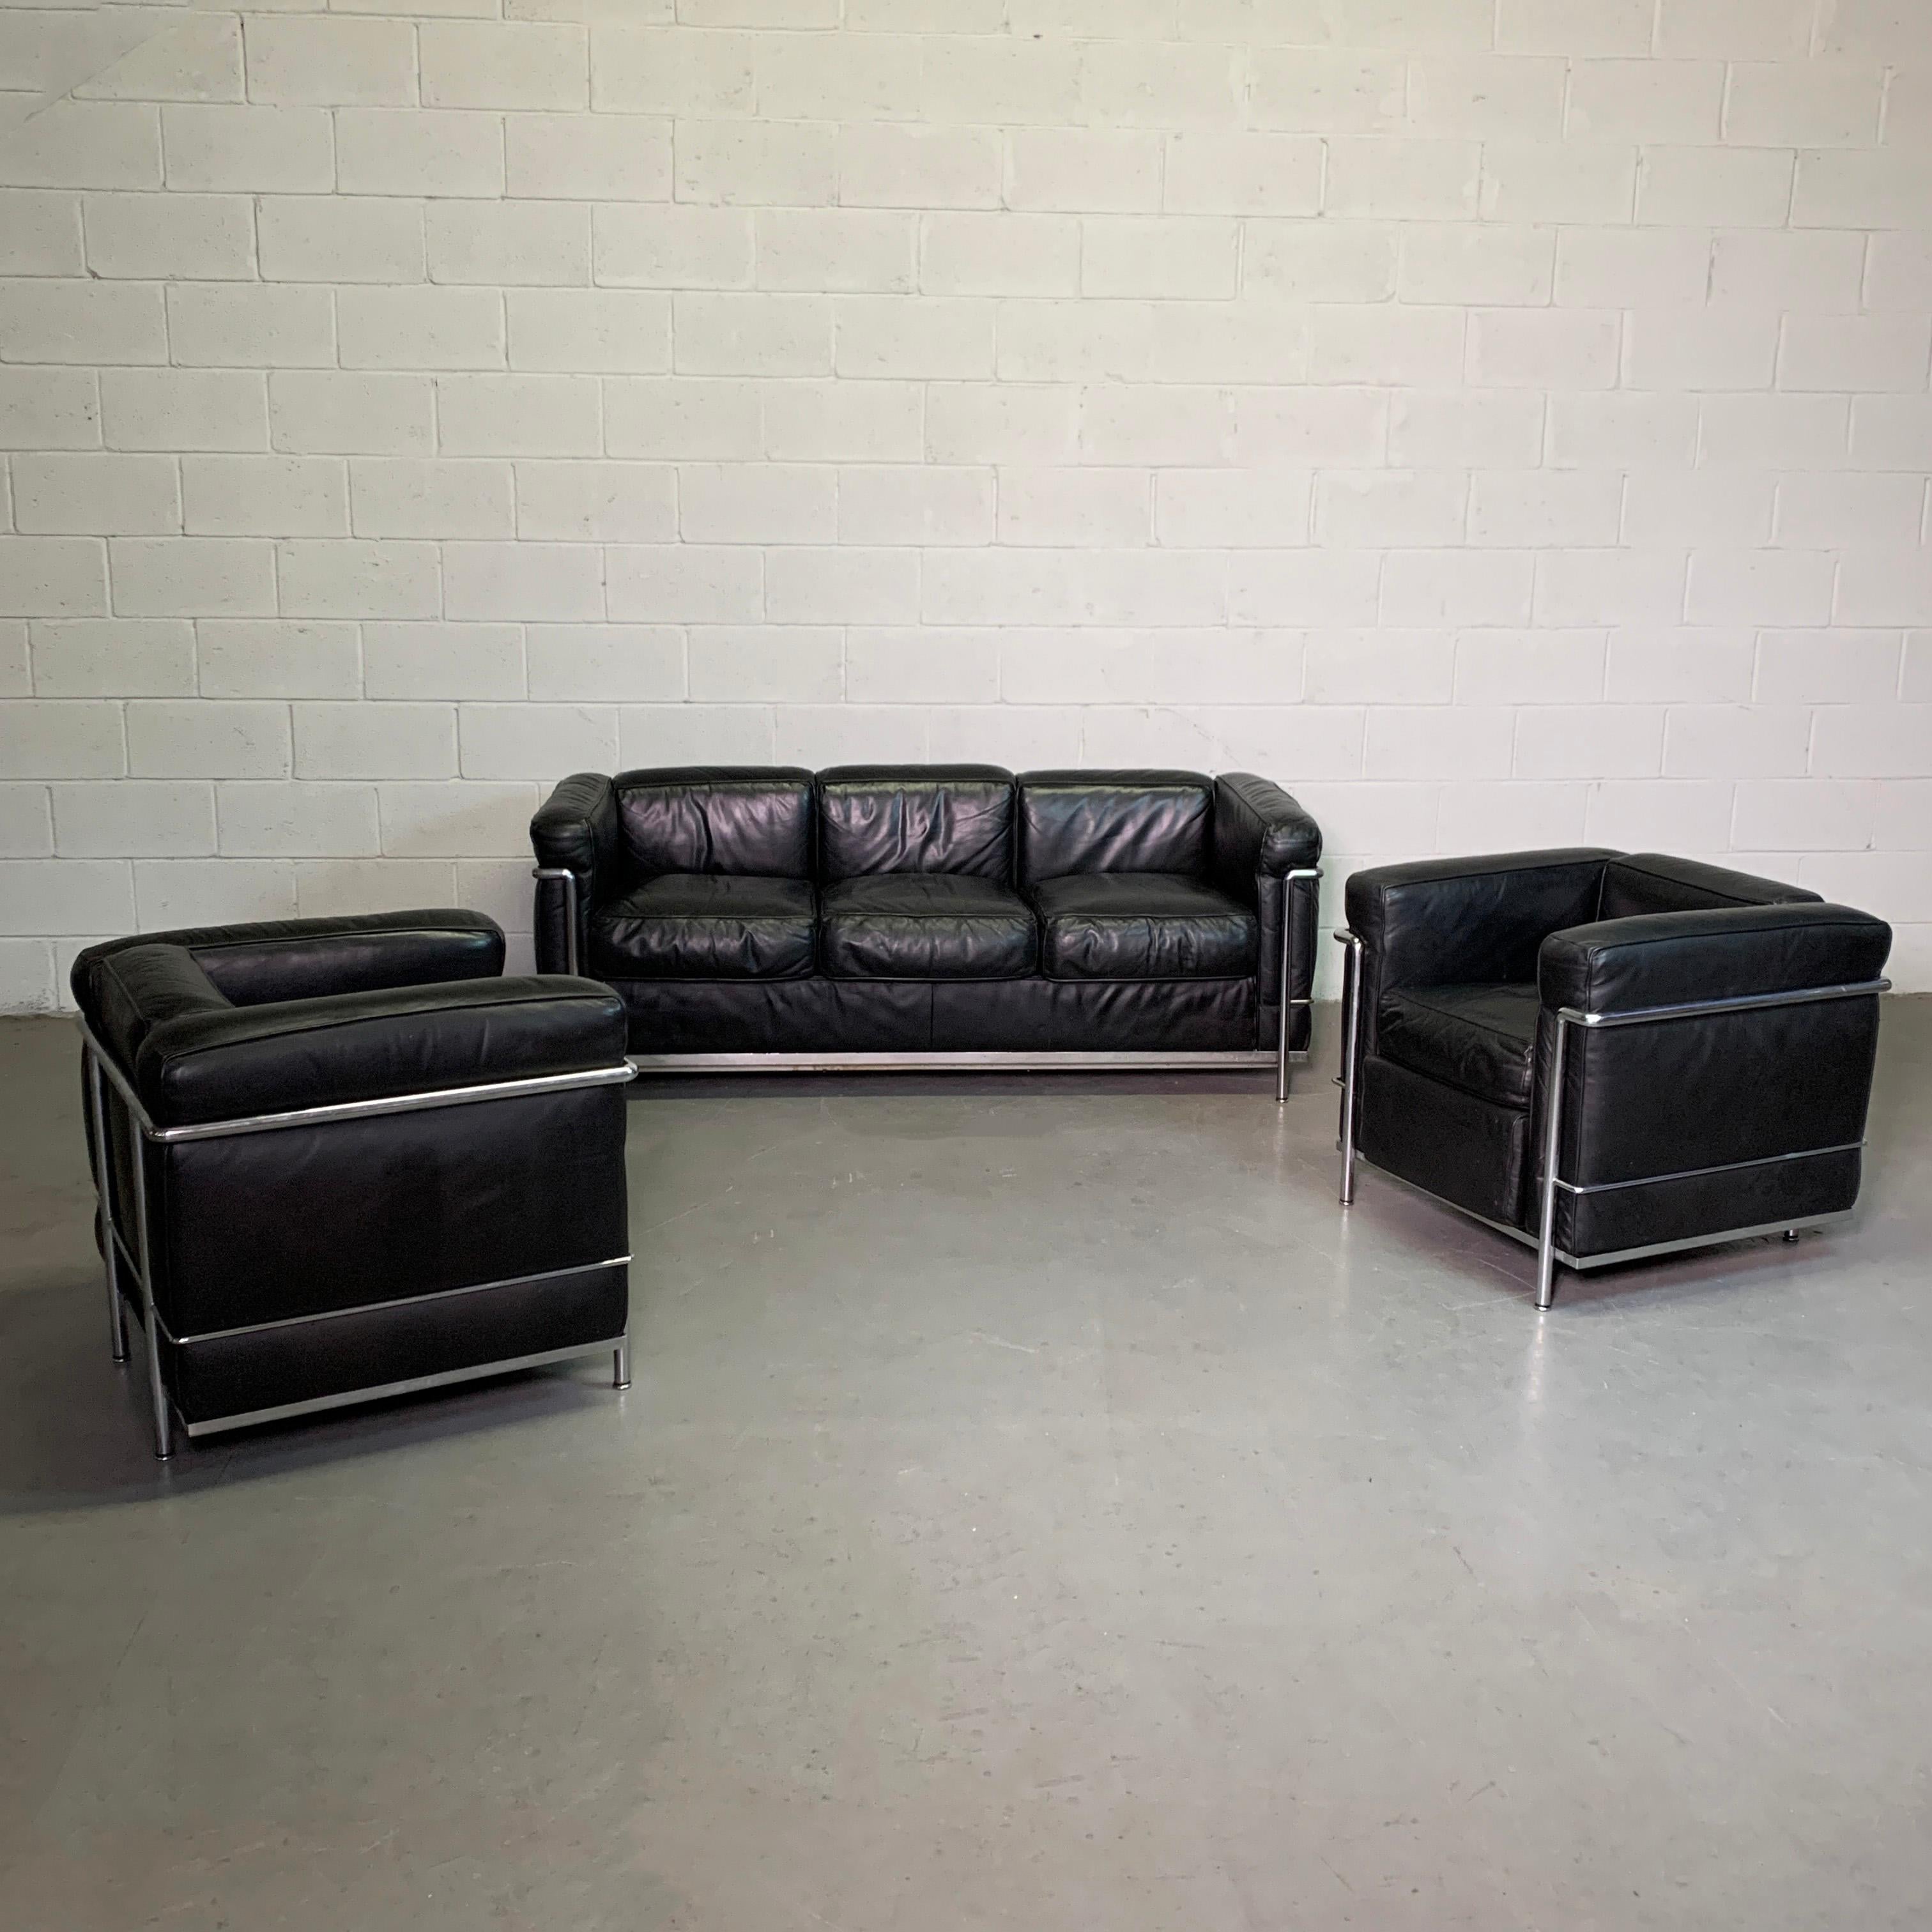 Italian Leather and Chrome Three Seat LC2 Sofa by Le Corbusier for Cassina For Sale